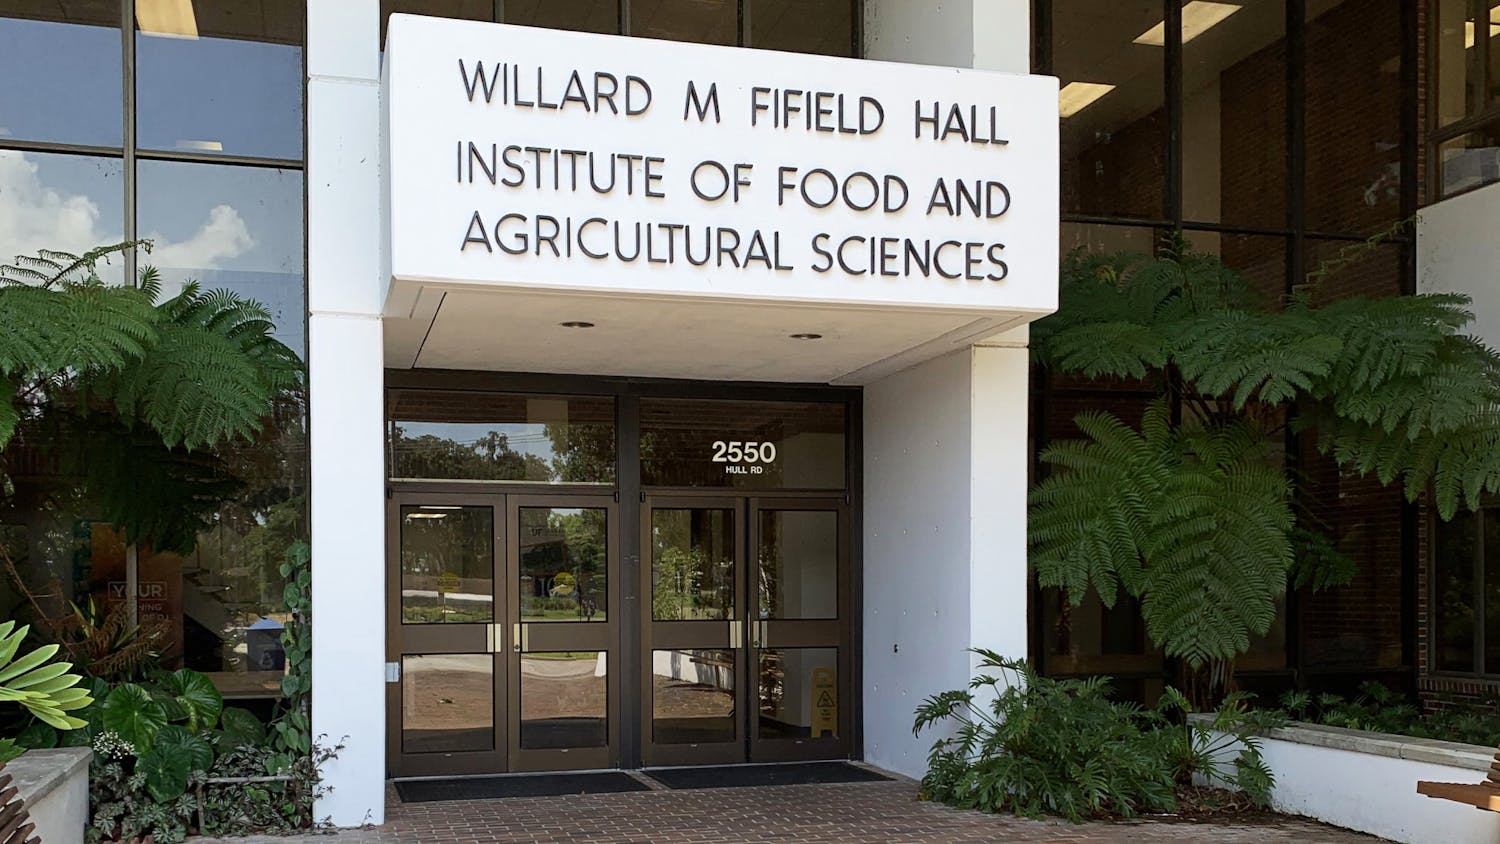 The Willard M. Fifield Hall Institute of Food and Agricultural Sciences, or IFAS, building on Tuesday, July 13, 2021. A Space Plants Lab, where plant molecular biologists Robert Ferl and Anna-Lisa Paul study plant growth in space environments, is located there.